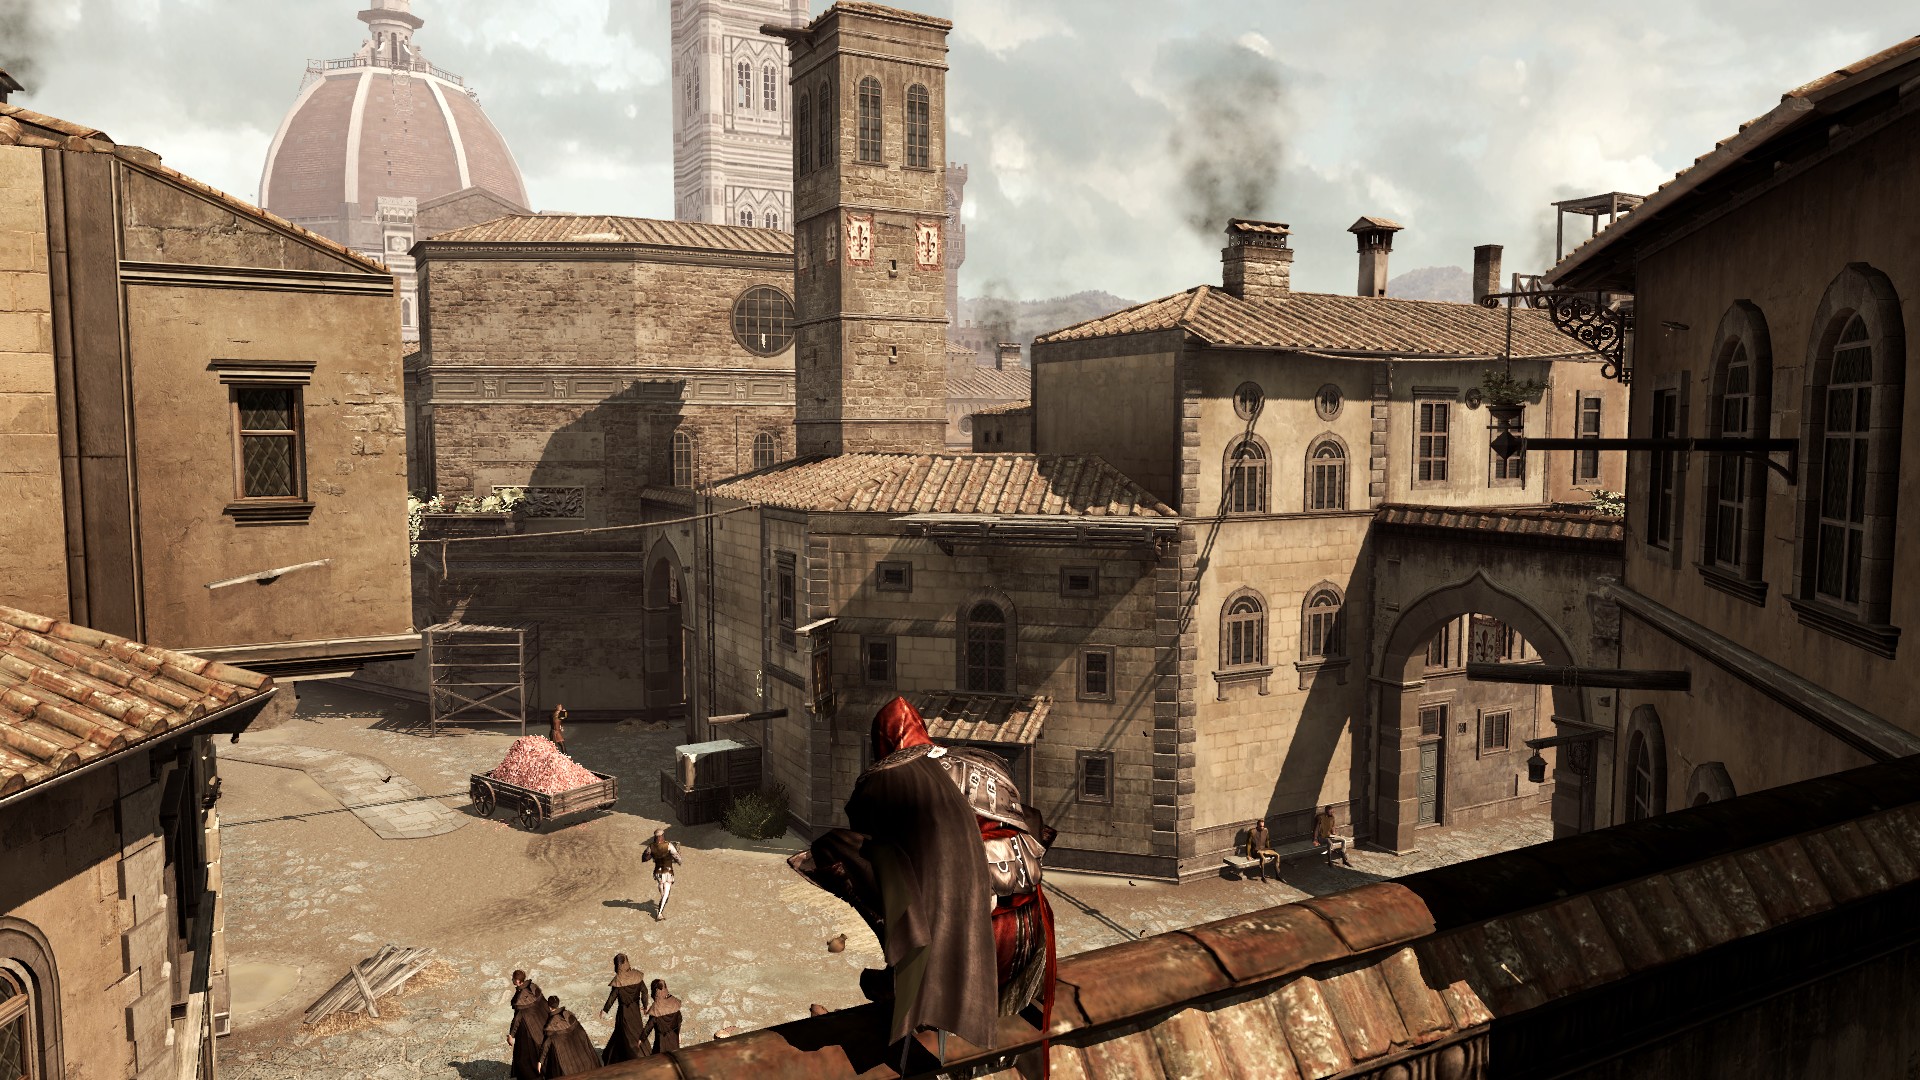 AC2VFM.zip (for AC2 Deluxe Edition - e.g. Steam) file - Assassin's Creed 2  Visual Fixup Mod for Assassin's Creed II - ModDB